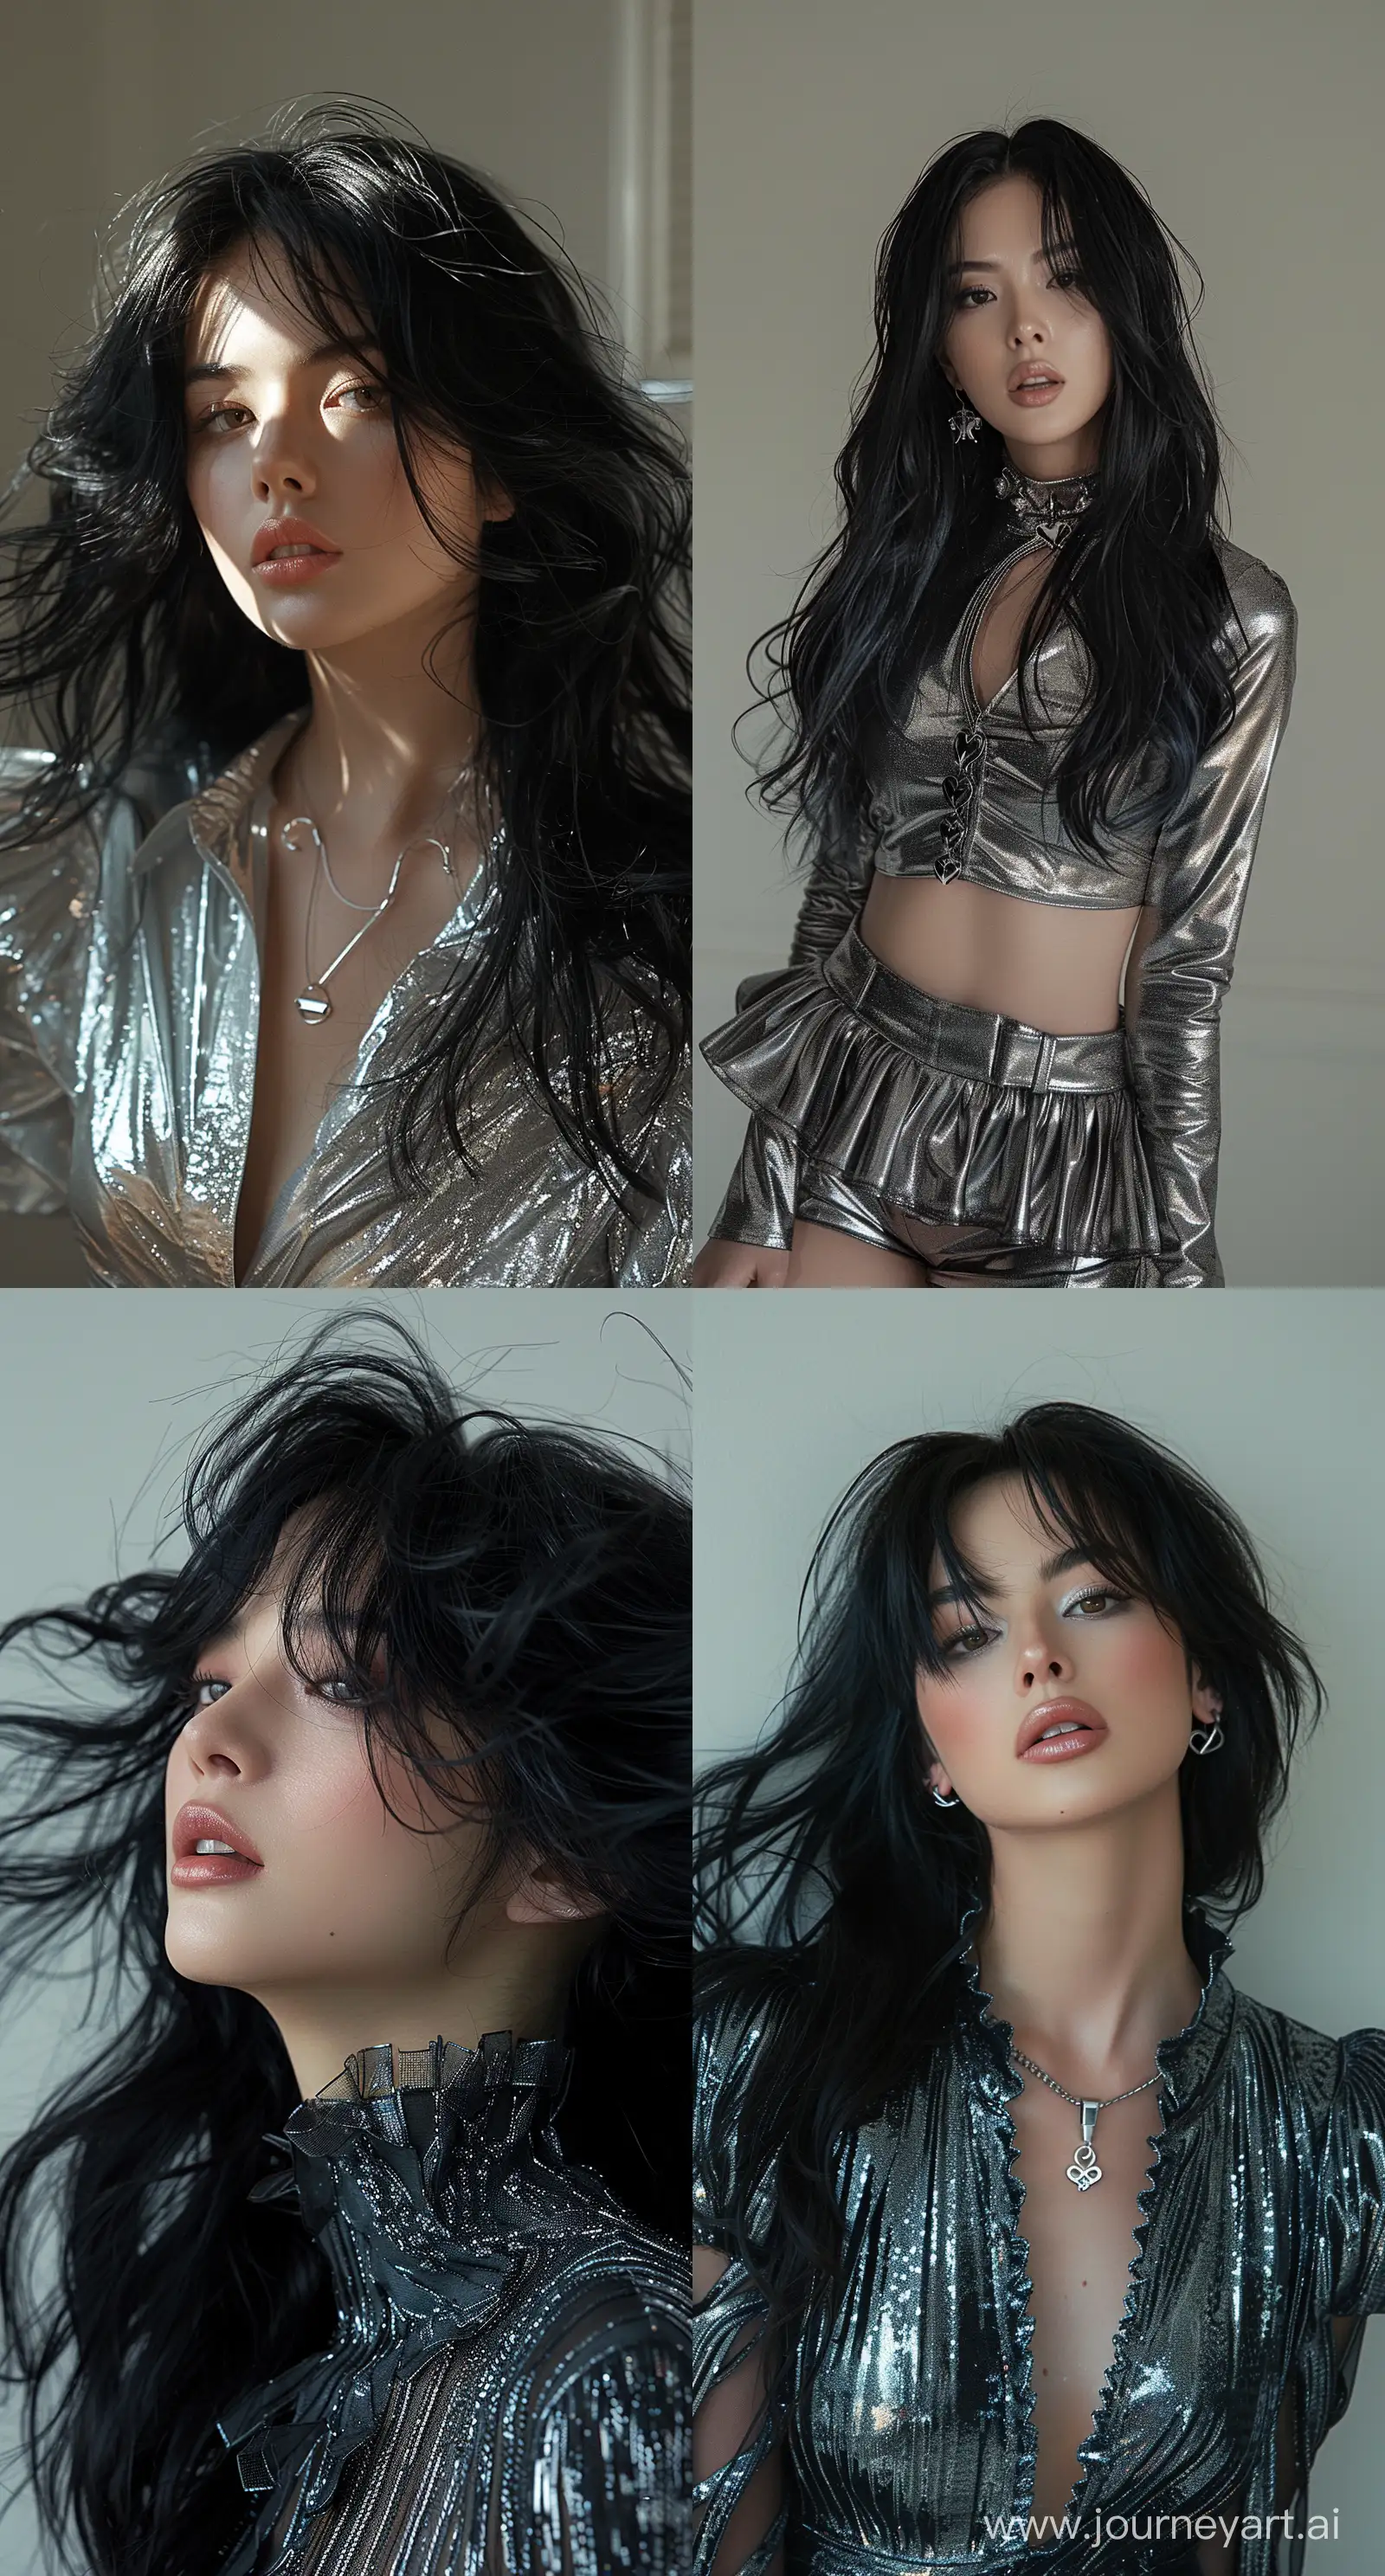 Elegant-Woman-with-Flowing-Black-Hair-in-Chrome-Hearts-Style-Portrait